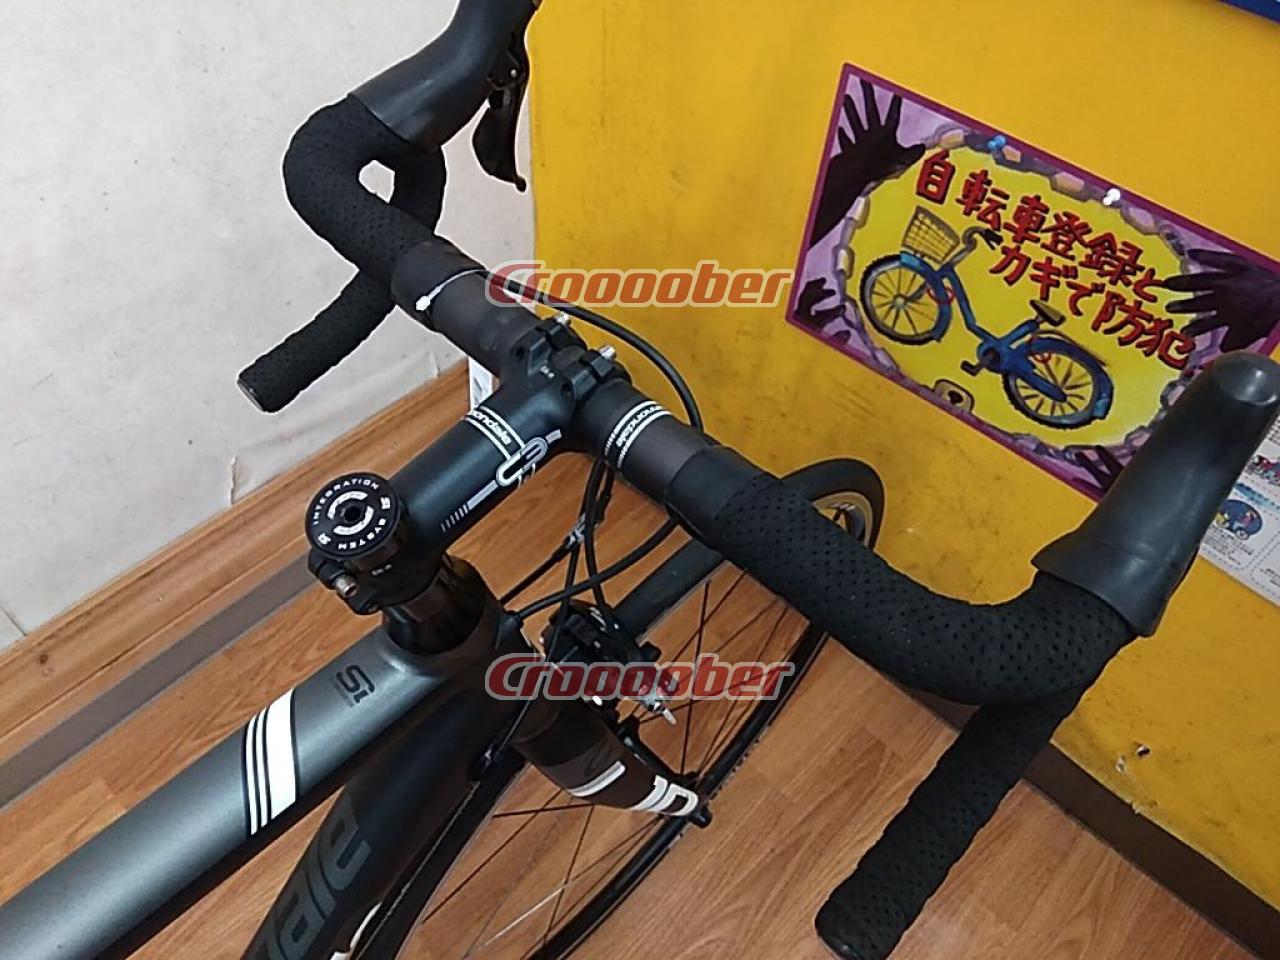 CANNONDALE CAAD10 アルミフレームロードバイク 2014年モデル 2x10S